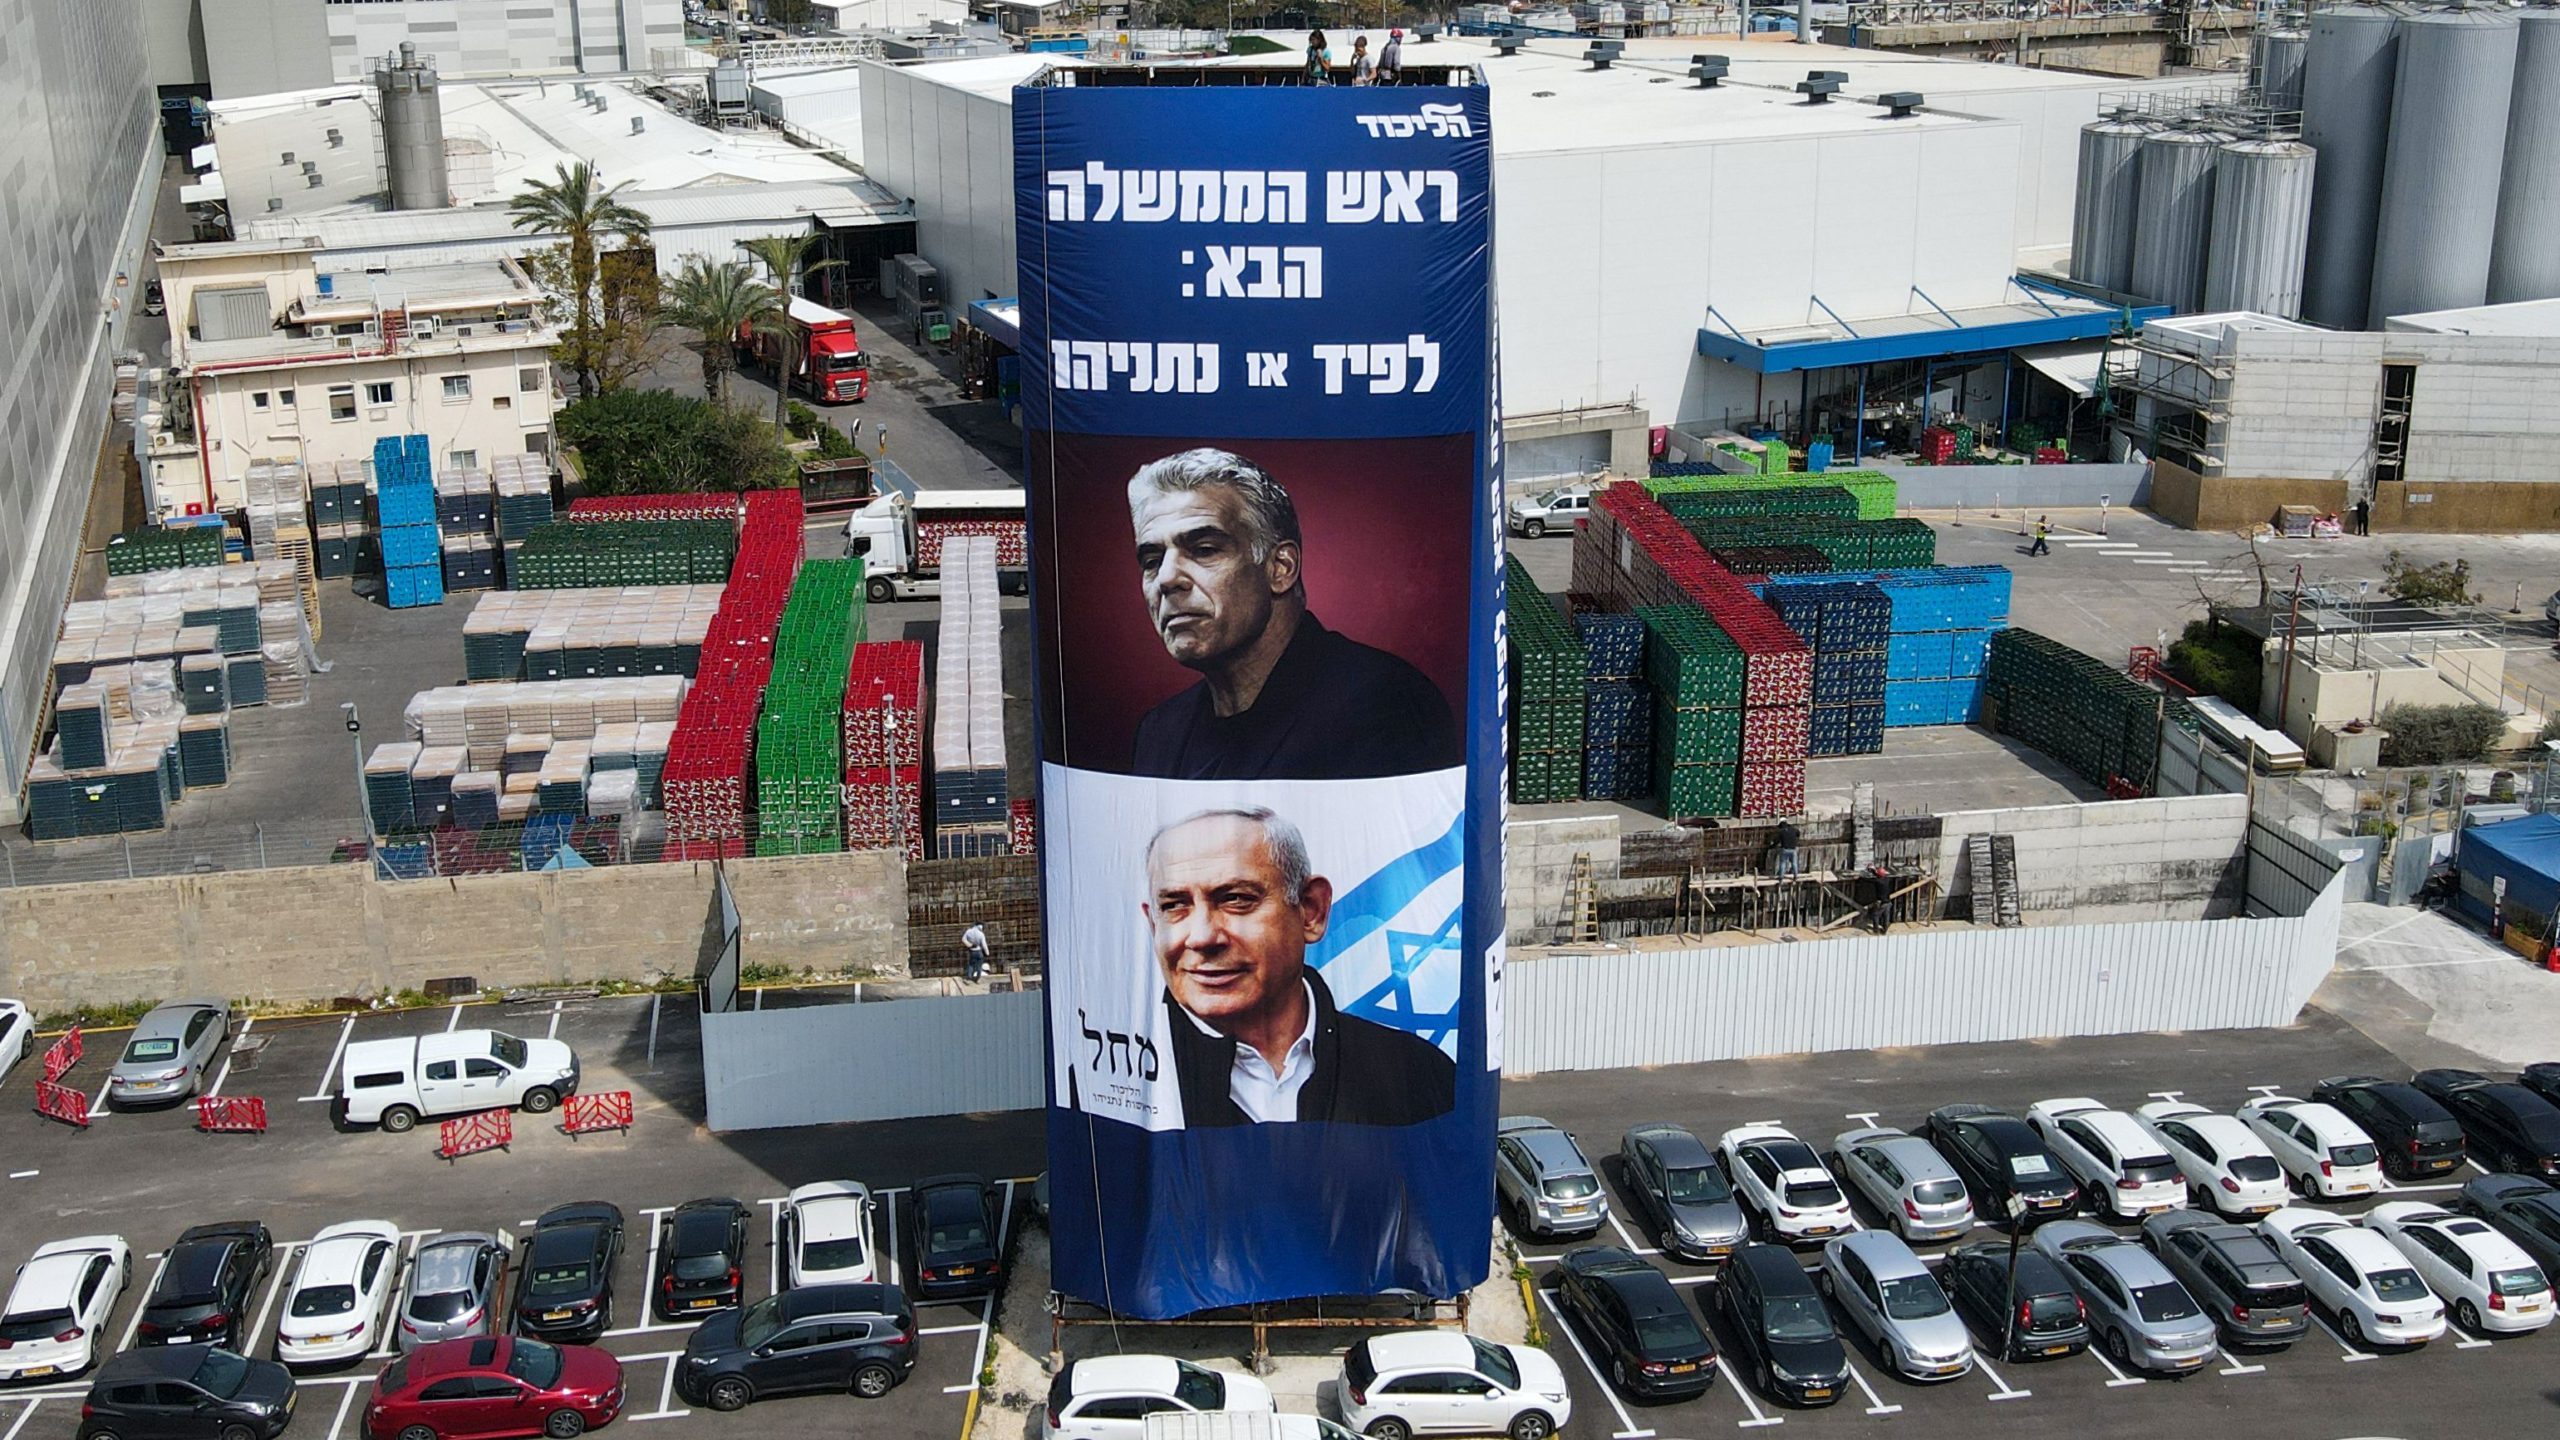 Israeli Election Rallies Turn Violent, While Netanyahu Makes Controversial Campaign Promise